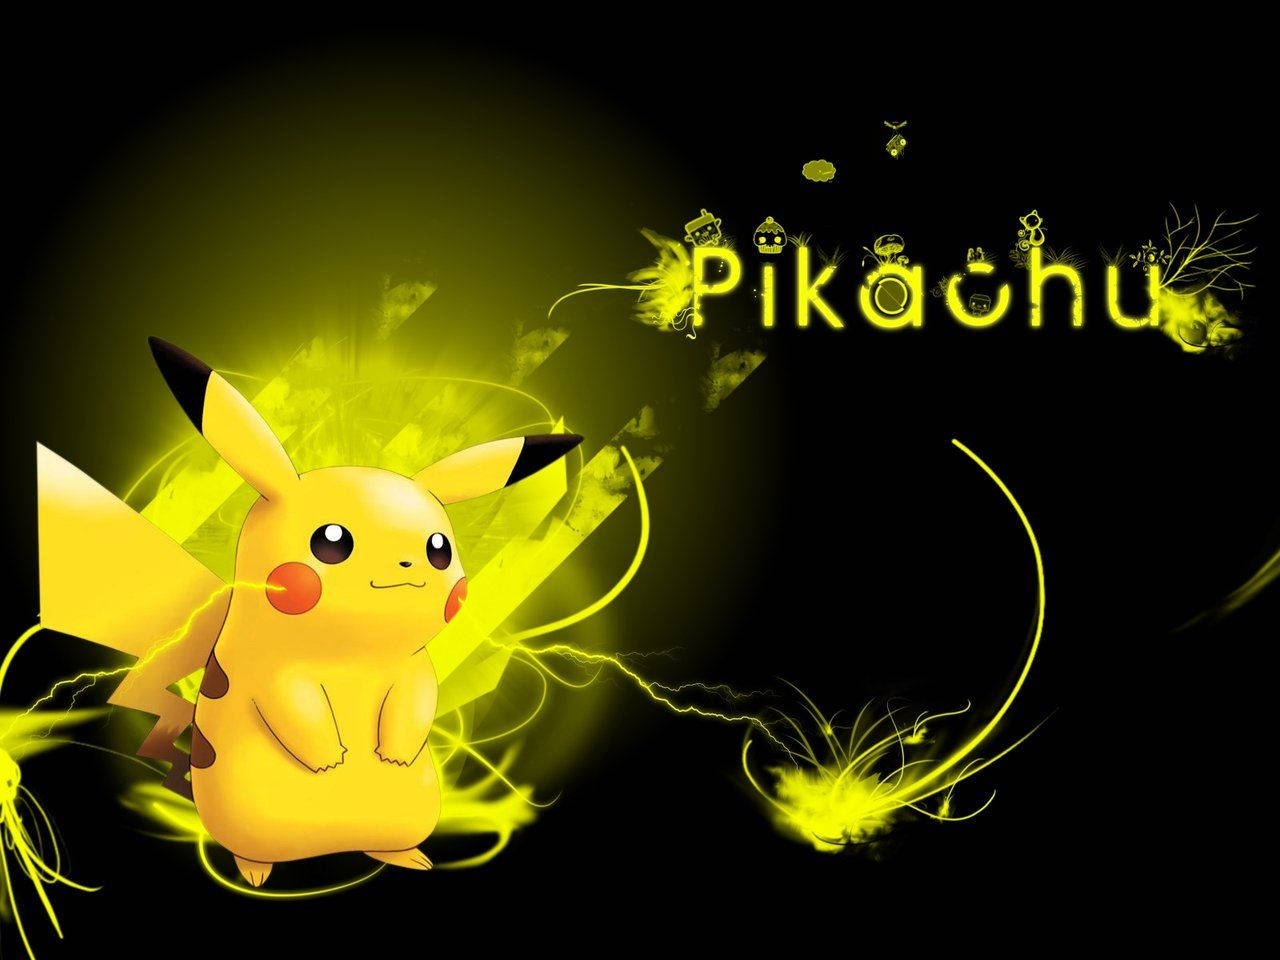 Pikachu 3d With Yellow Electricity Background